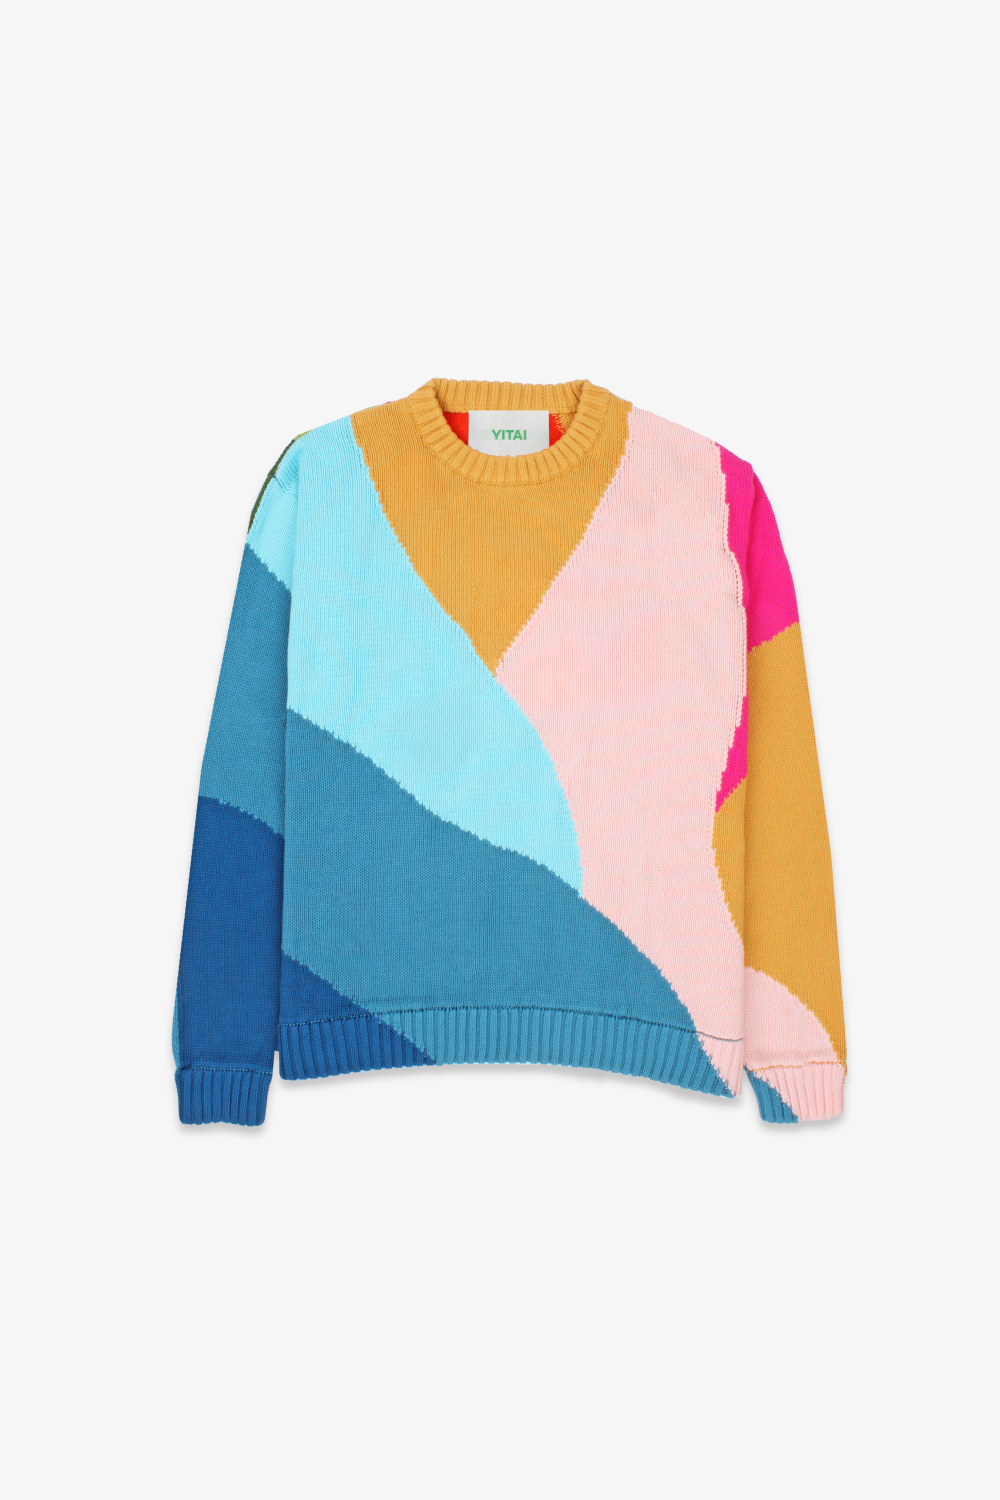 Layered Terrain Knitted Crewneck